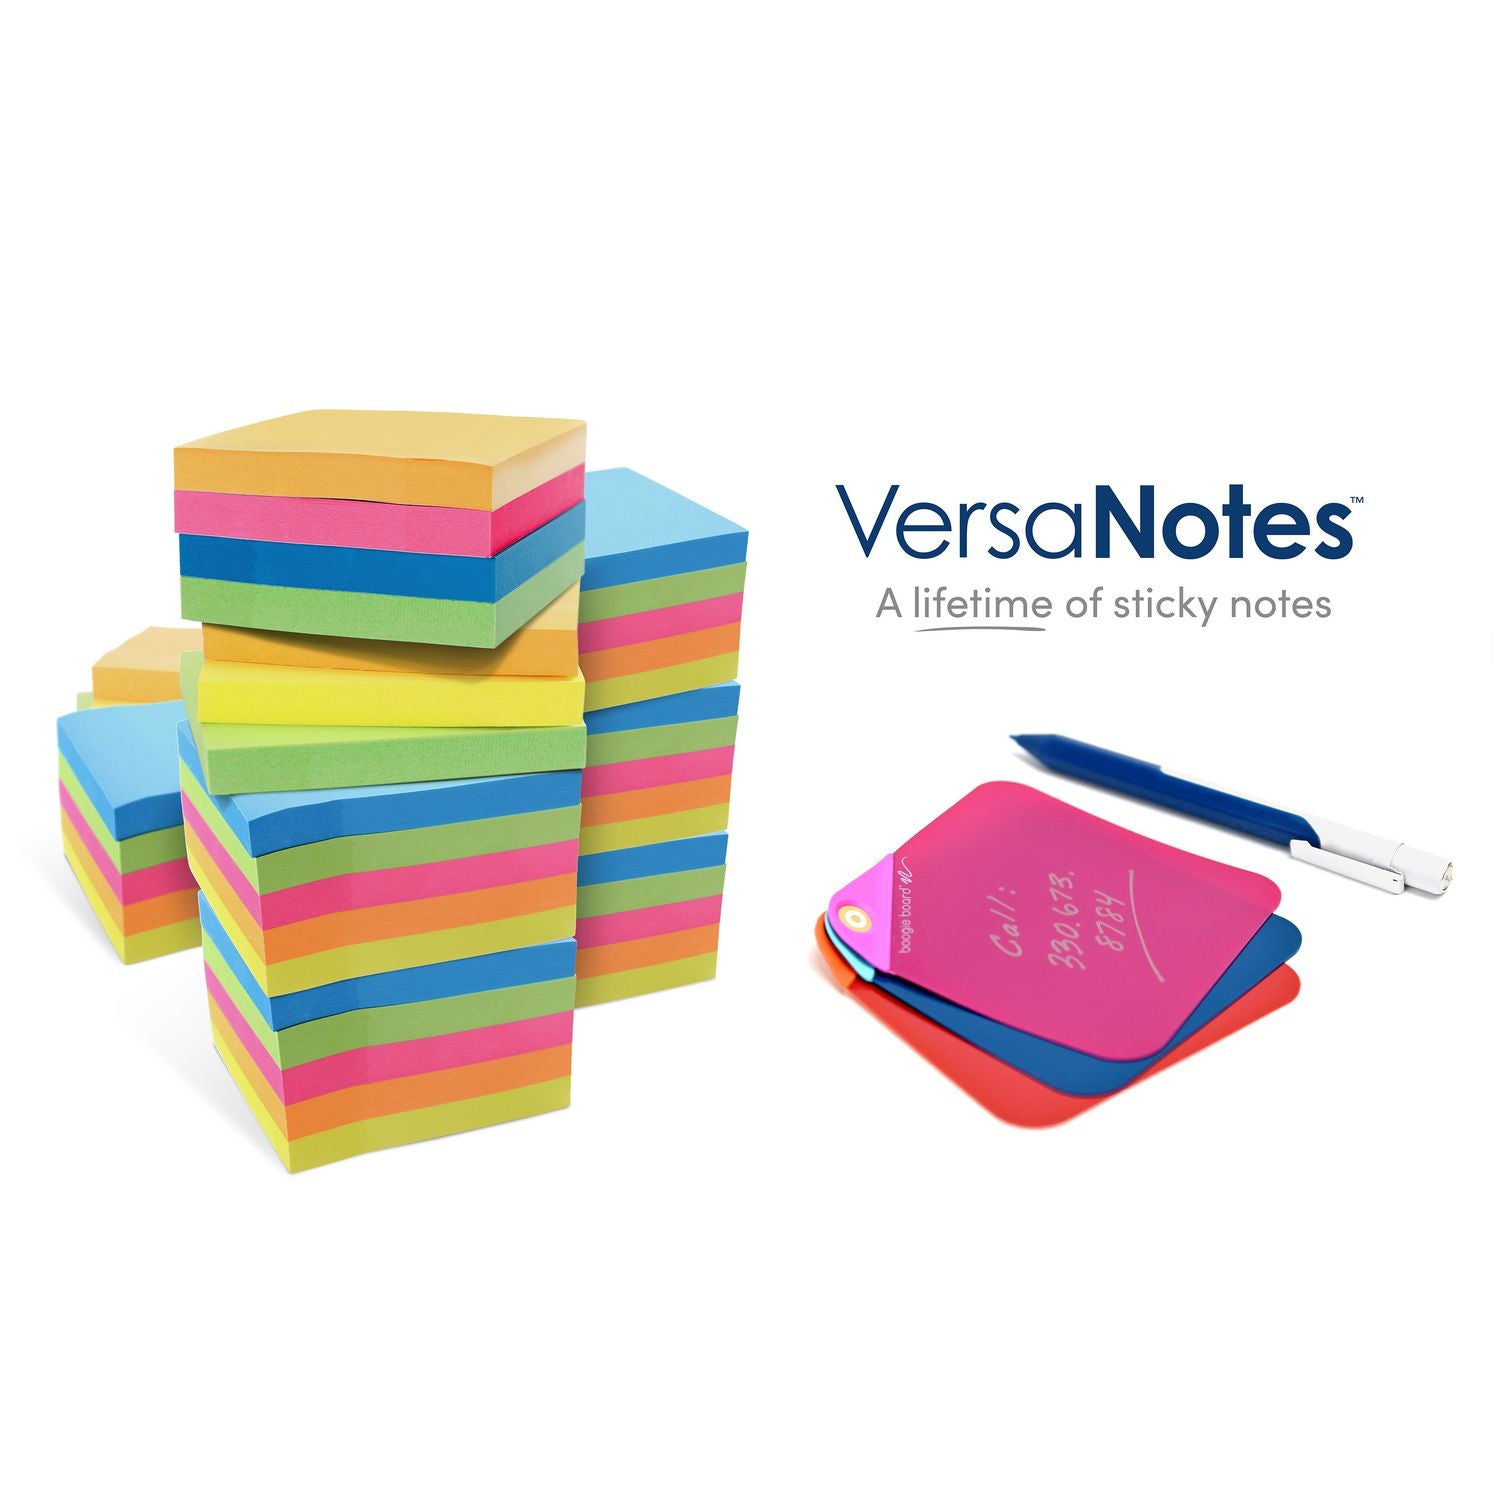 versanotes-starter-pack-reusable-notes-4-x-6-three-assorted-color-notes-plus-pen_imvvn20m60001 - 2